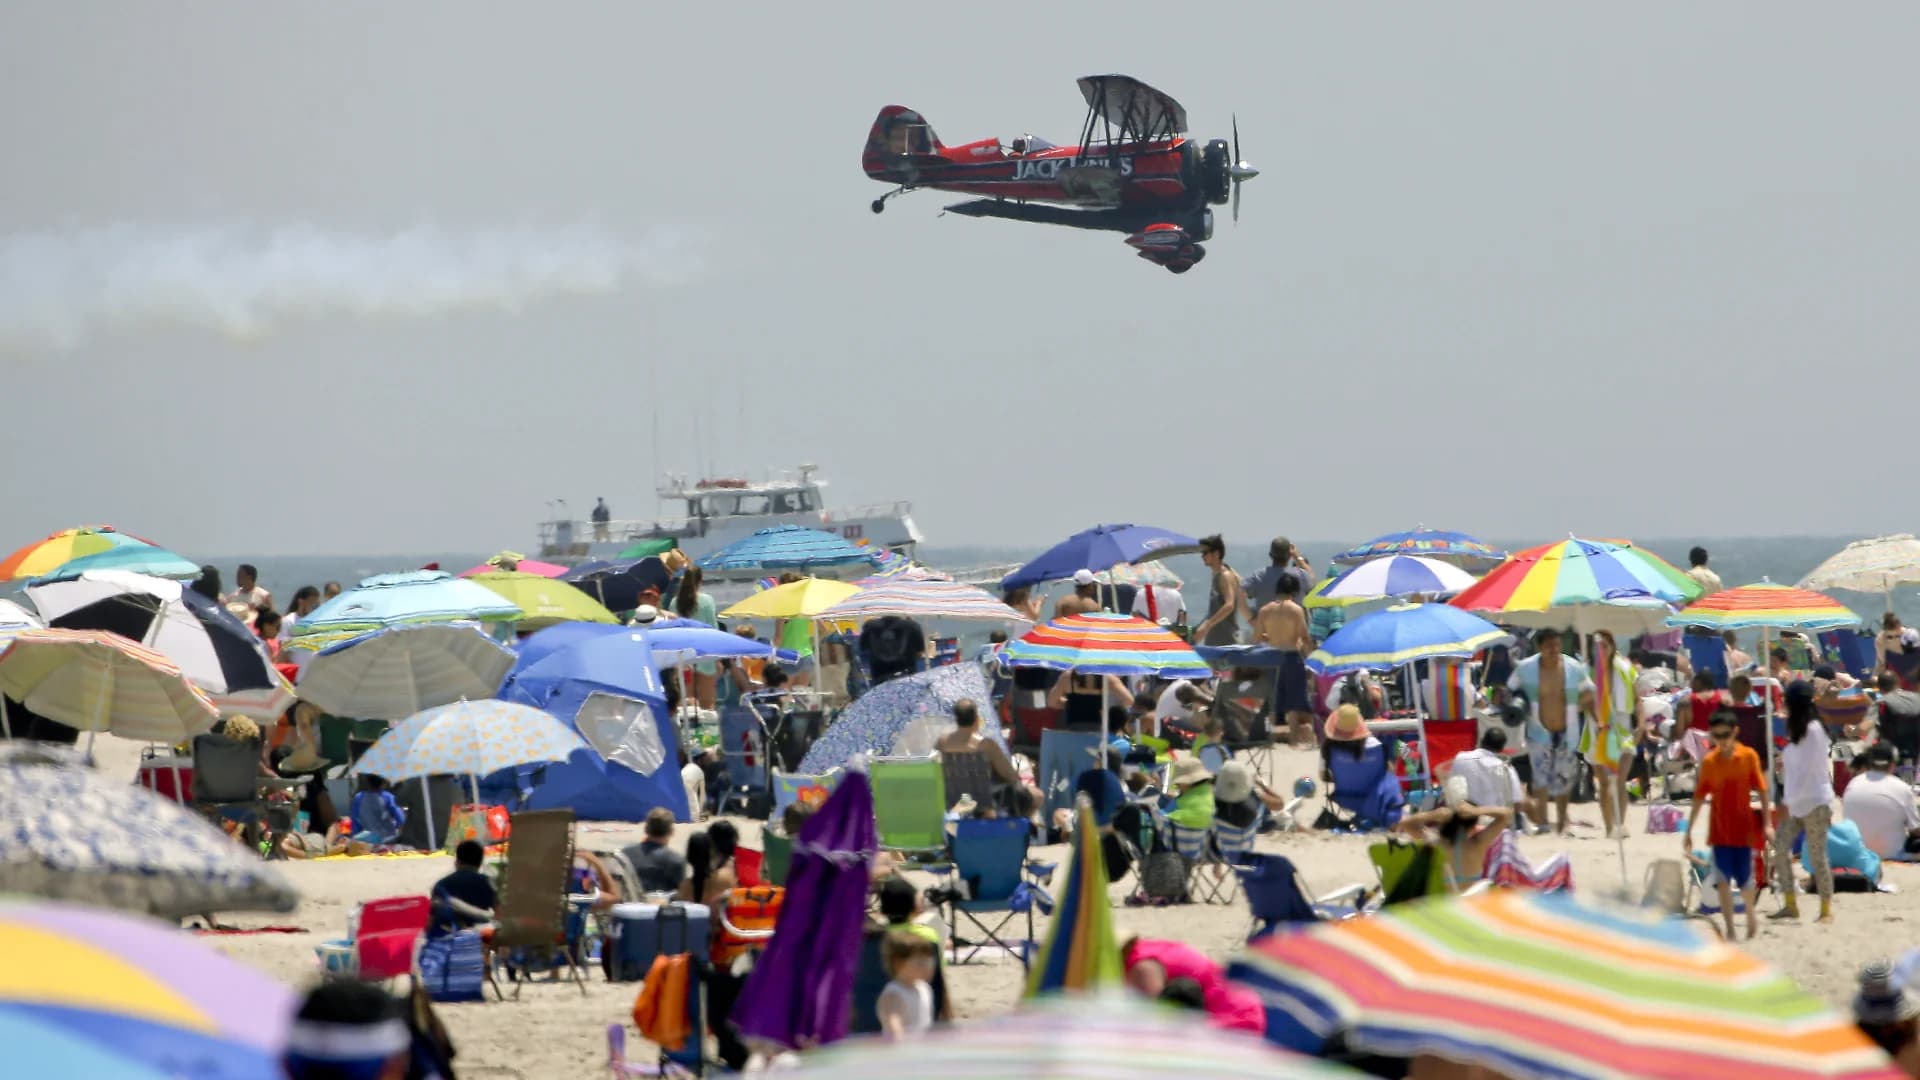 Guide: 2022 Bethpage Air Show at Jones Beach